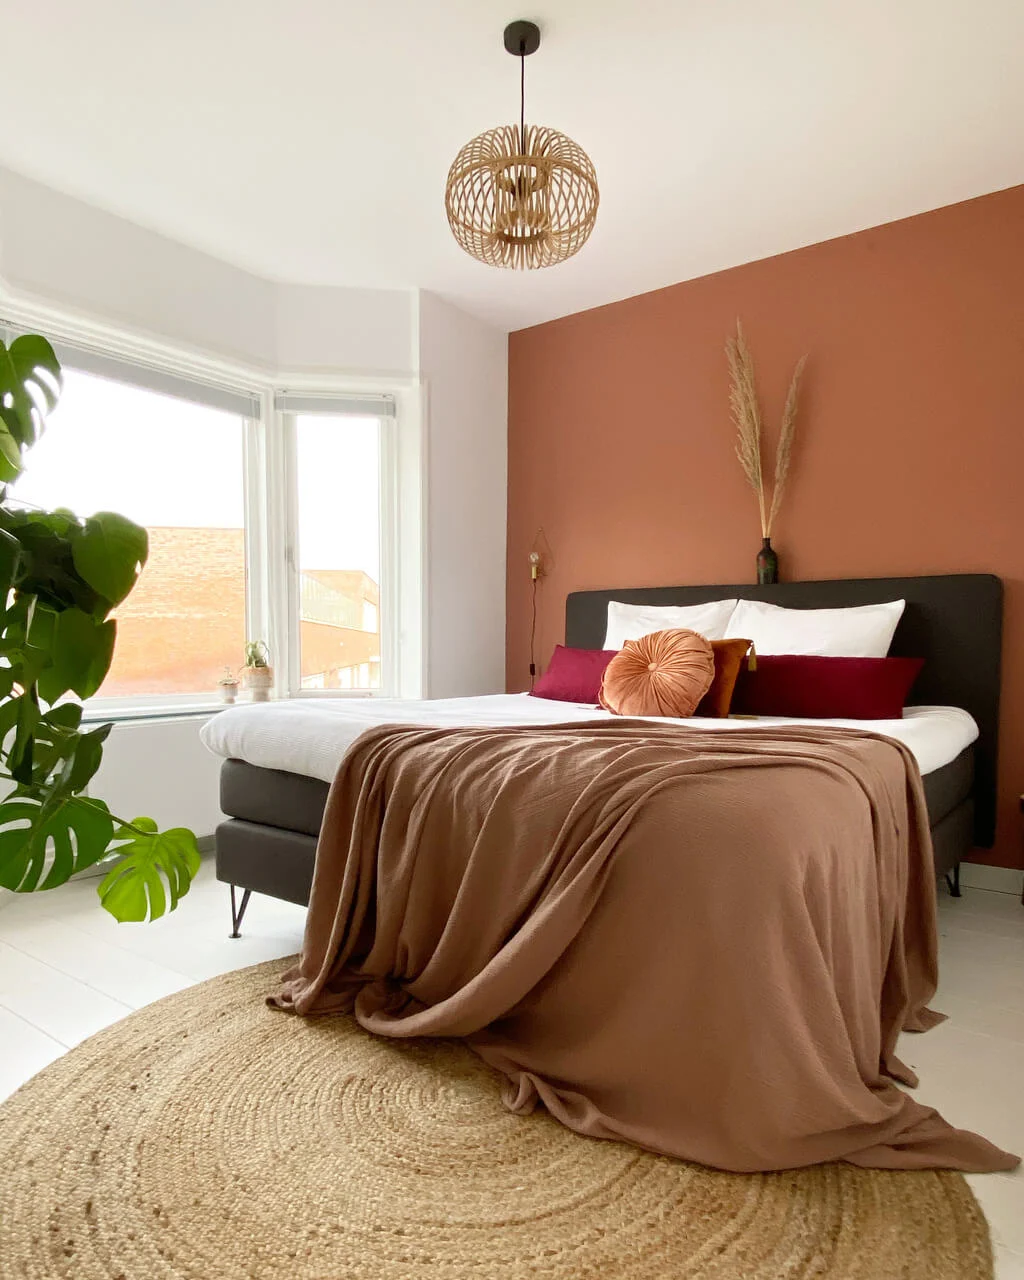  Terracotta and Ivory two colour combination for bedroom walls